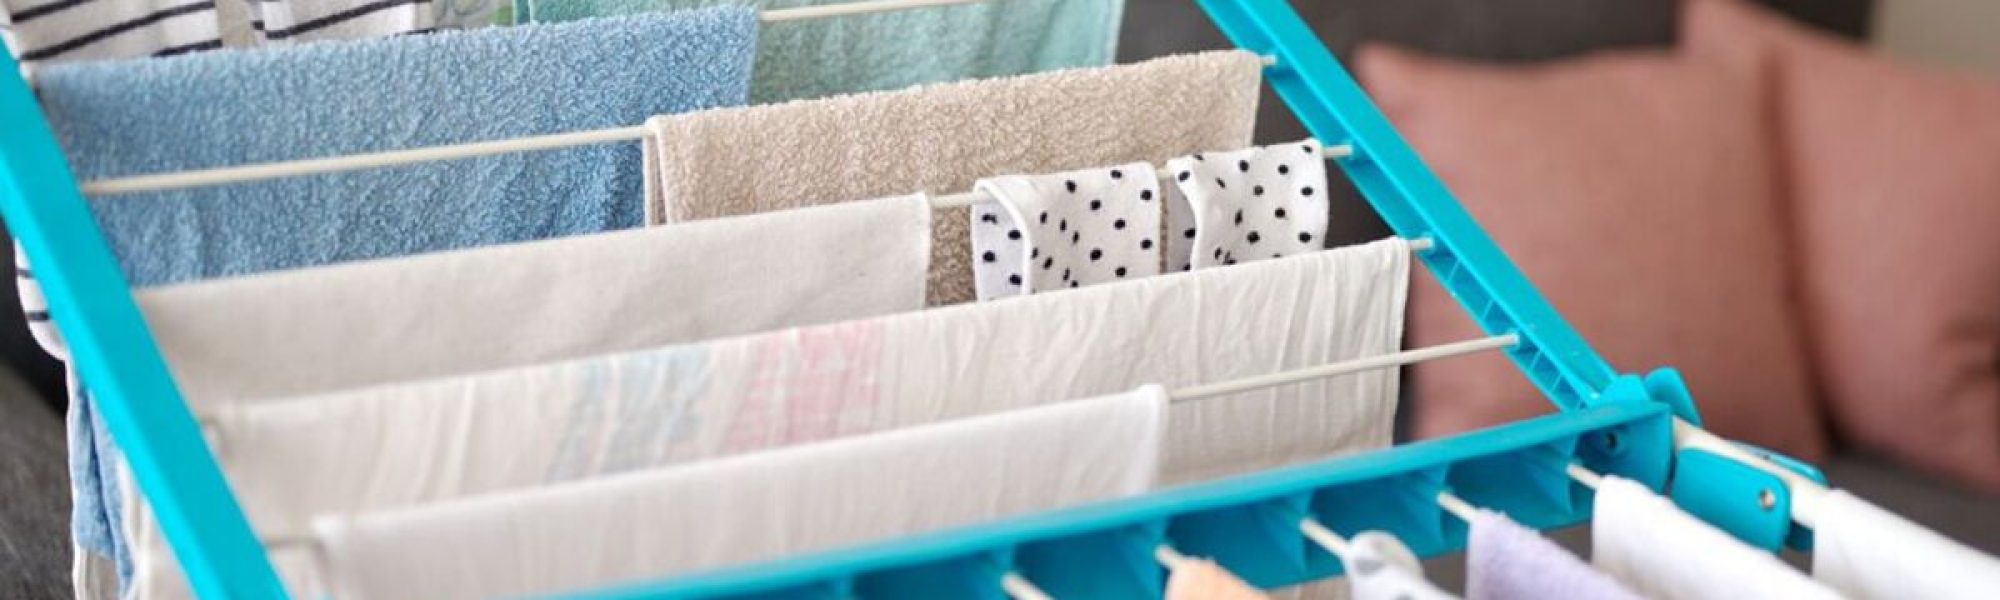 Ingenious hack to slash the cost of drying your clothes by 80%